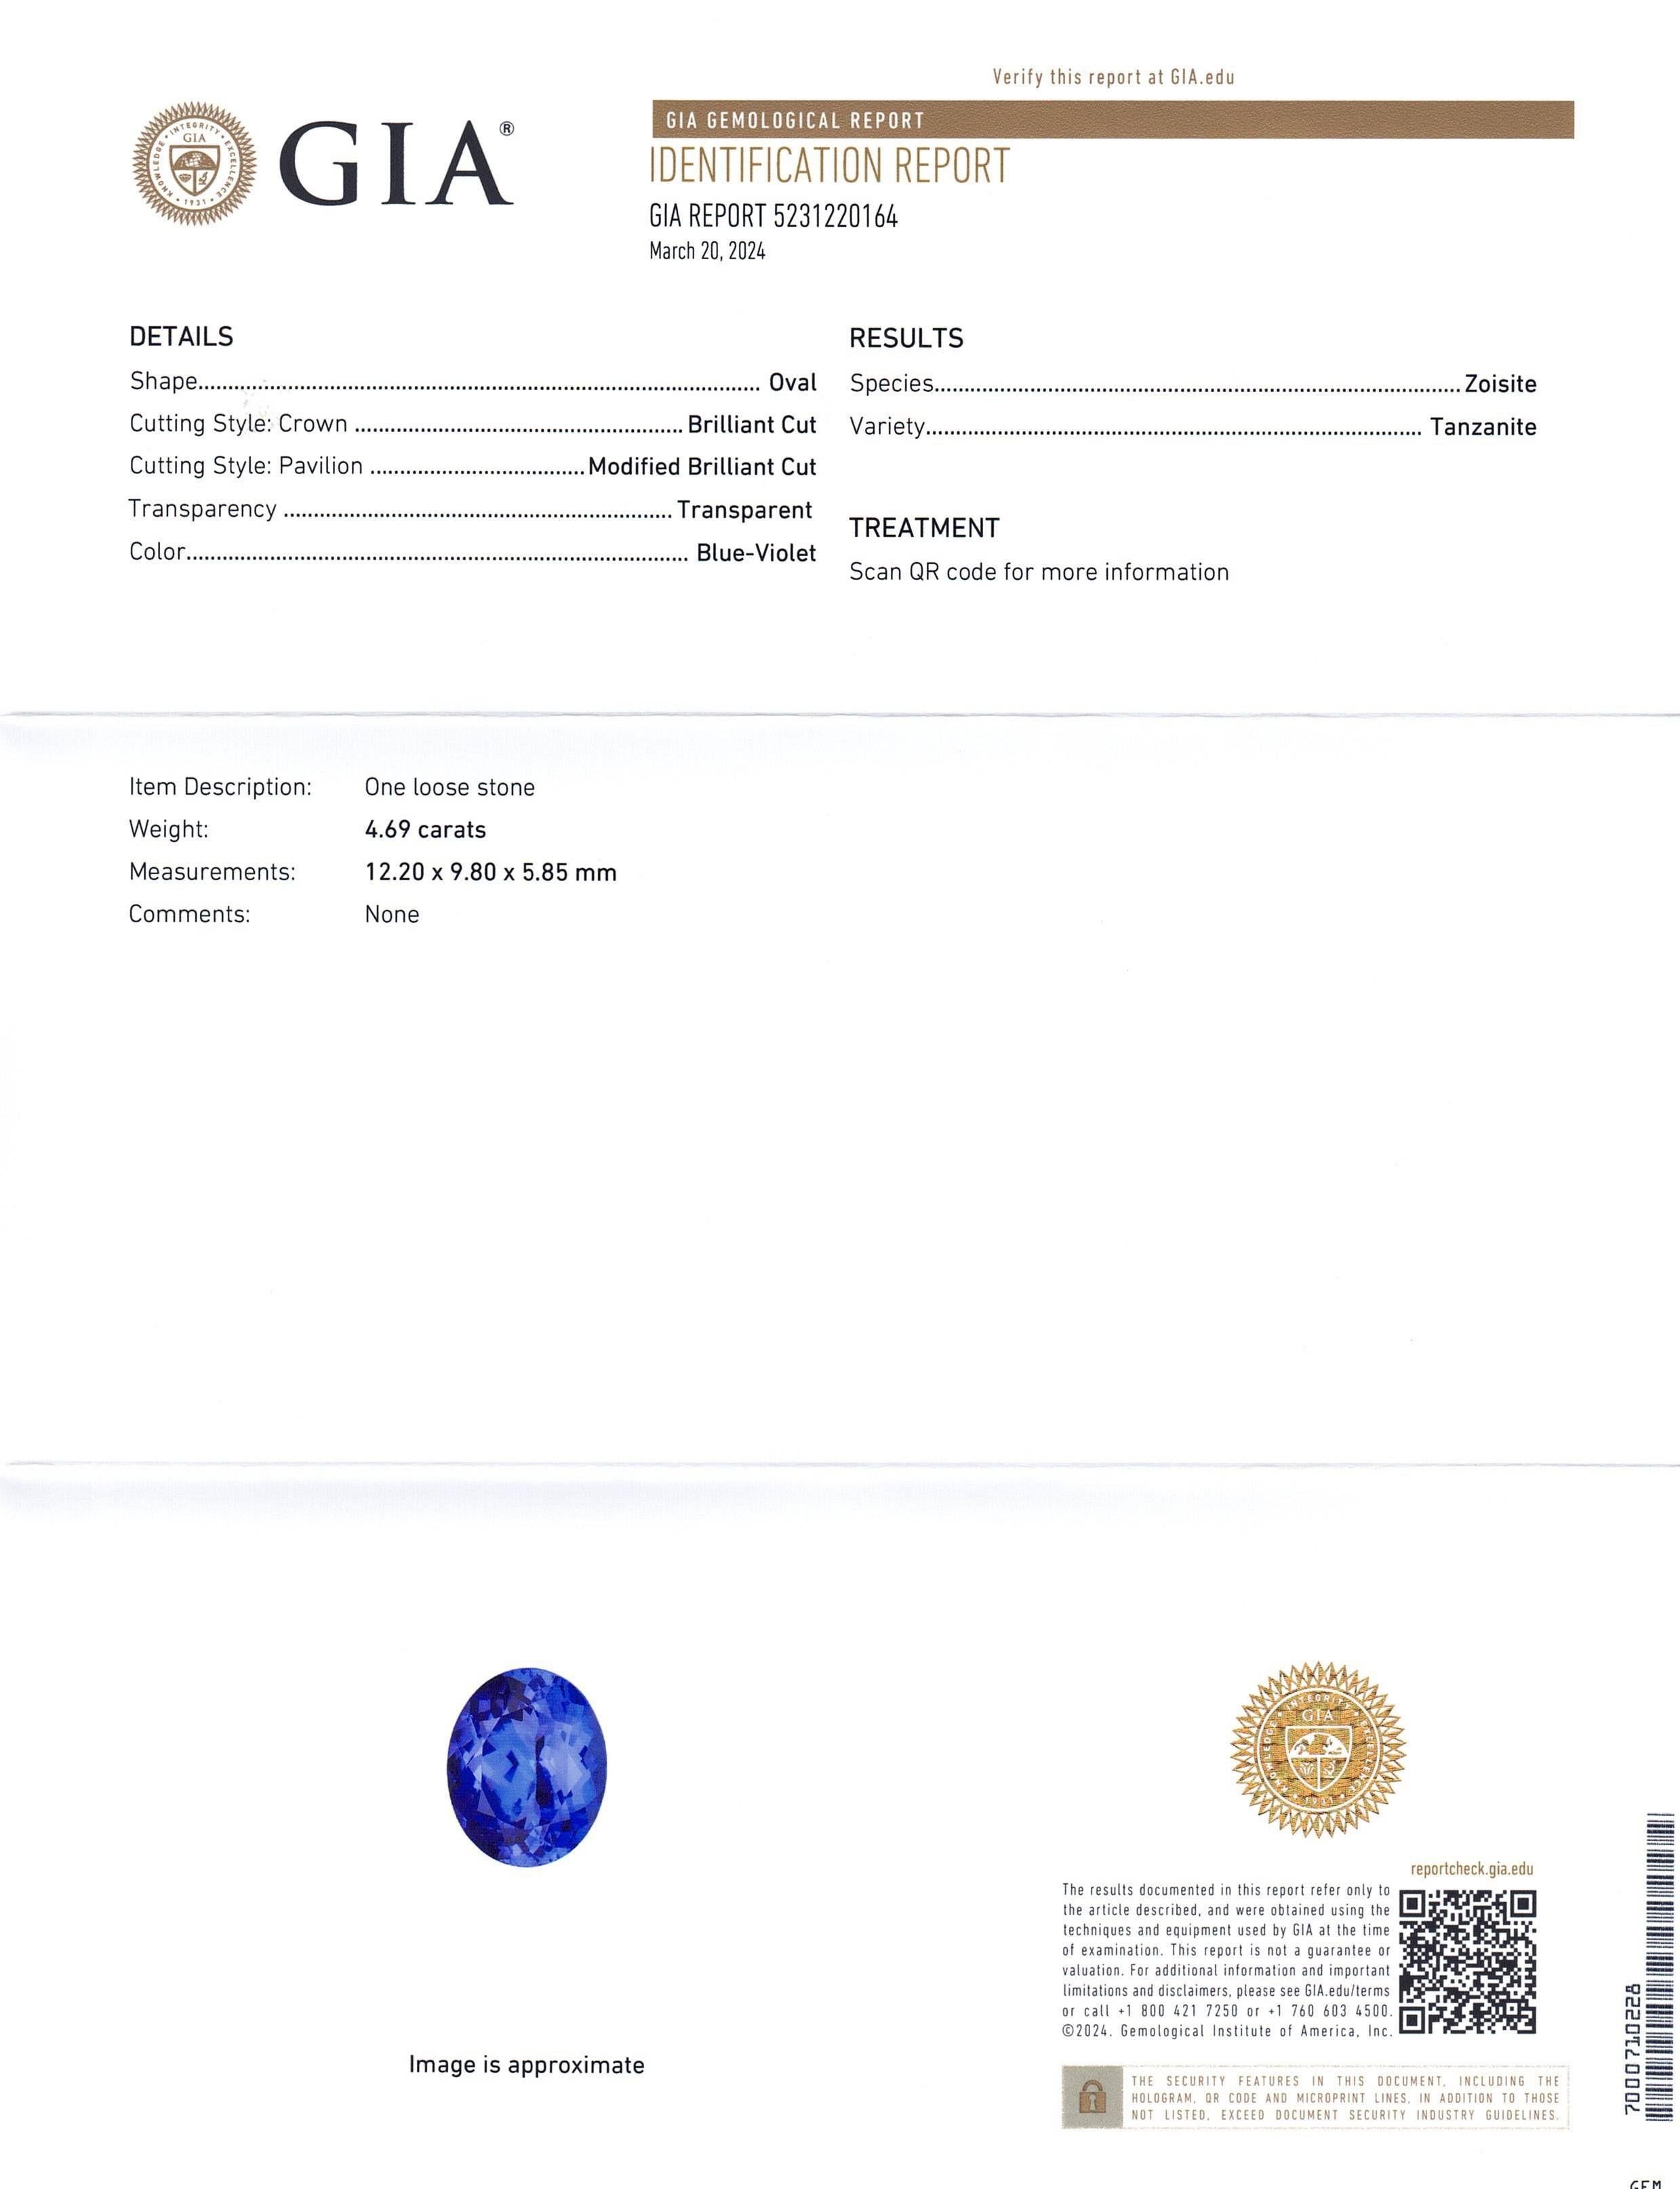 This is a stunning GIA Certified Tanzanite 


The GIA report reads as follows:

GIA Report Number: 5231220164
Shape: Oval
Cutting Style: 
Cutting Style: Crown: Brilliant Cut
Cutting Style: Pavilion: Modified Brilliant Cut
Transparency: